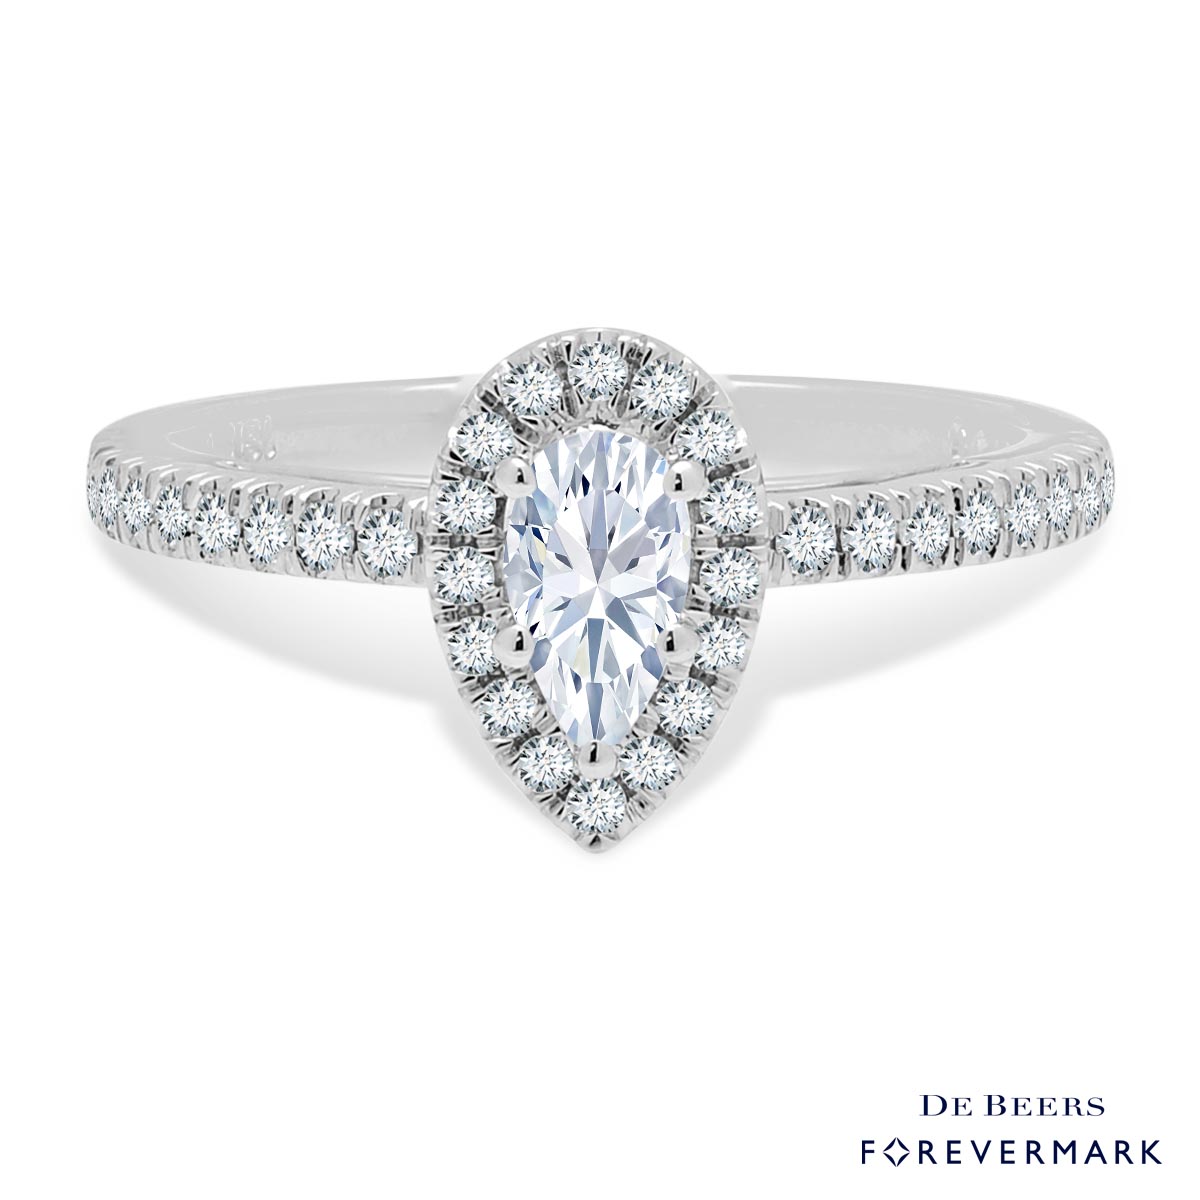 De Beers Forevermark Pear Shaped Diamond Center of My Universe Engagement Ring in 18kt White Gold (5/8ct tw)